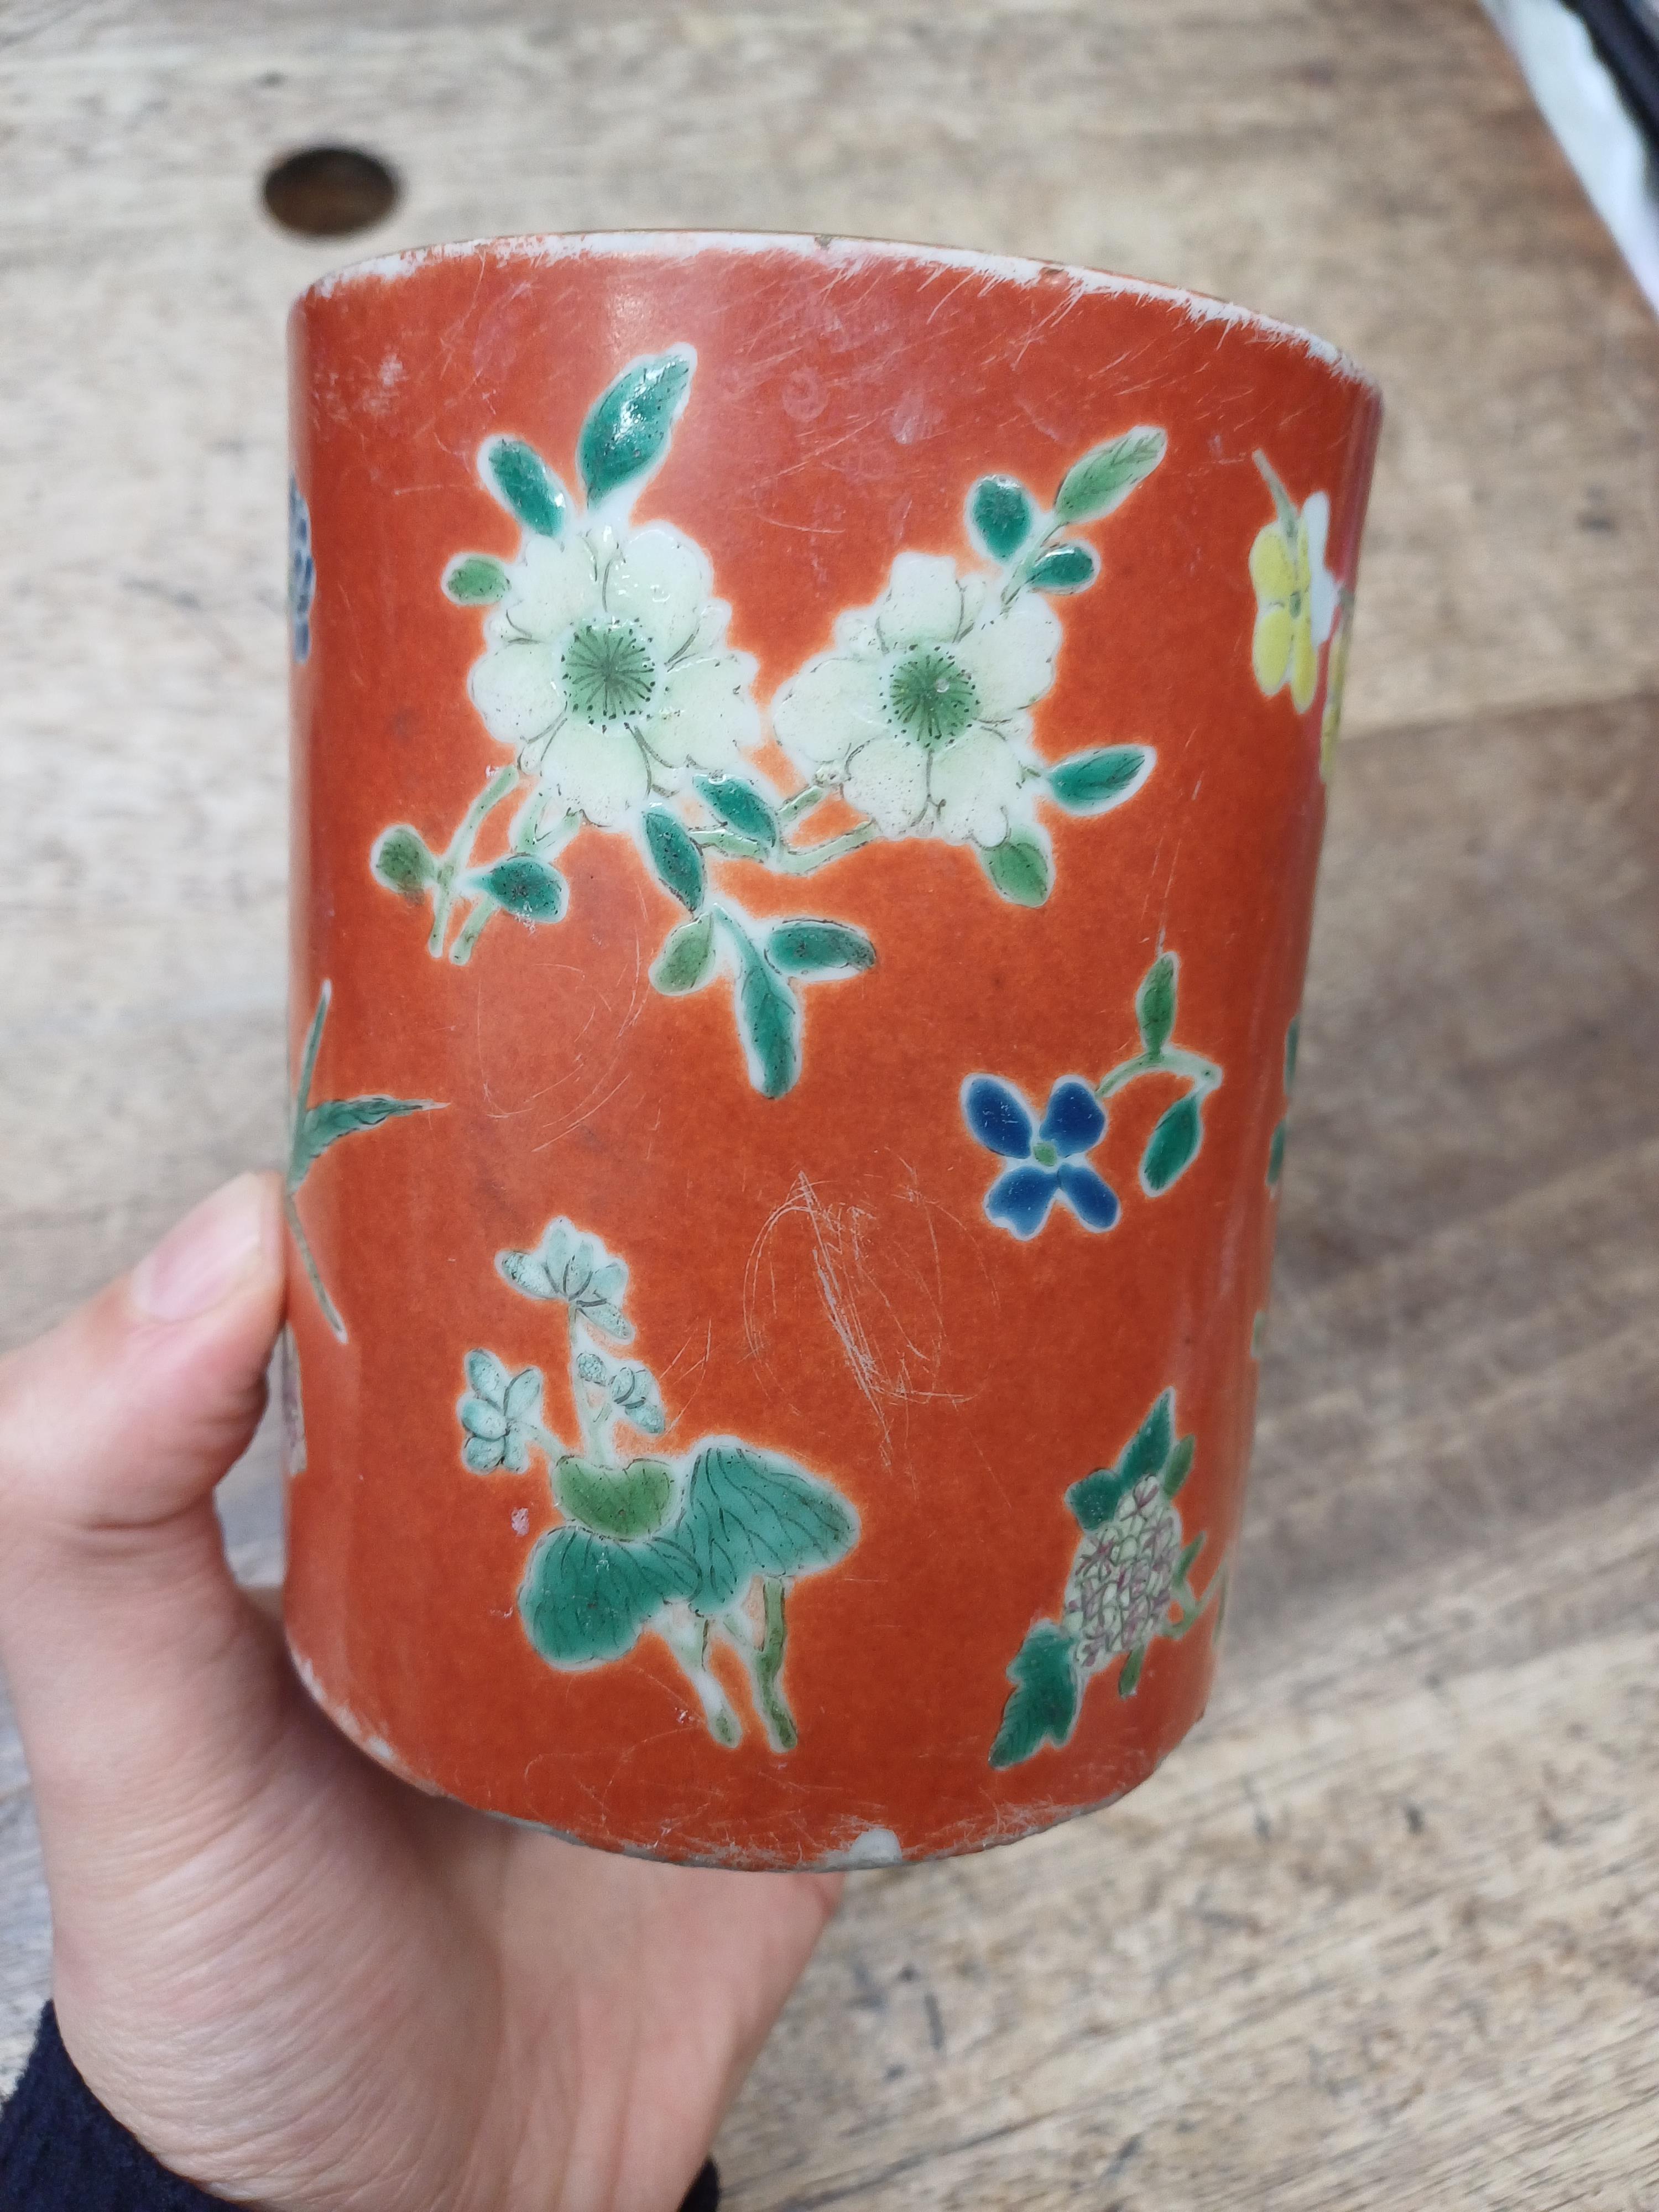 A CHINESE FAMILLE-ROSE CORAL-GROUND 'BLOSSOMS' BRUSH POT, BITONG 清十八至十九世紀 粉彩珊瑚紅地花卉紋筆筒 - Image 7 of 11